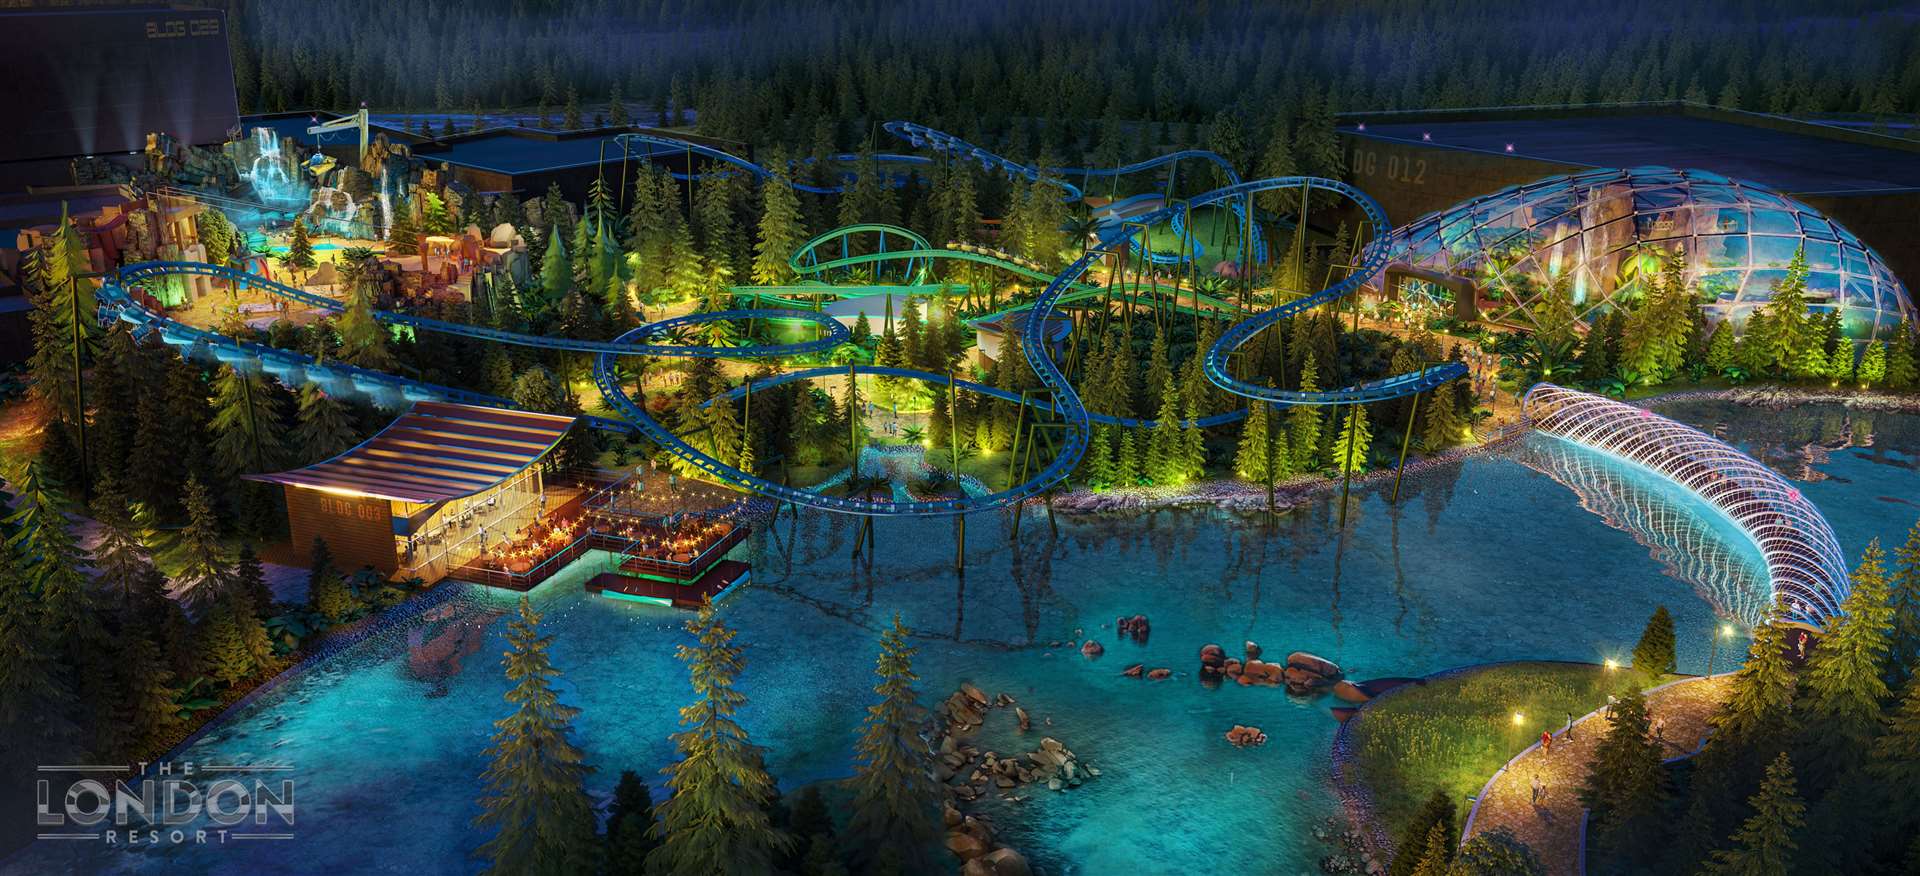 Base Camp is the new zone announced at London Resort